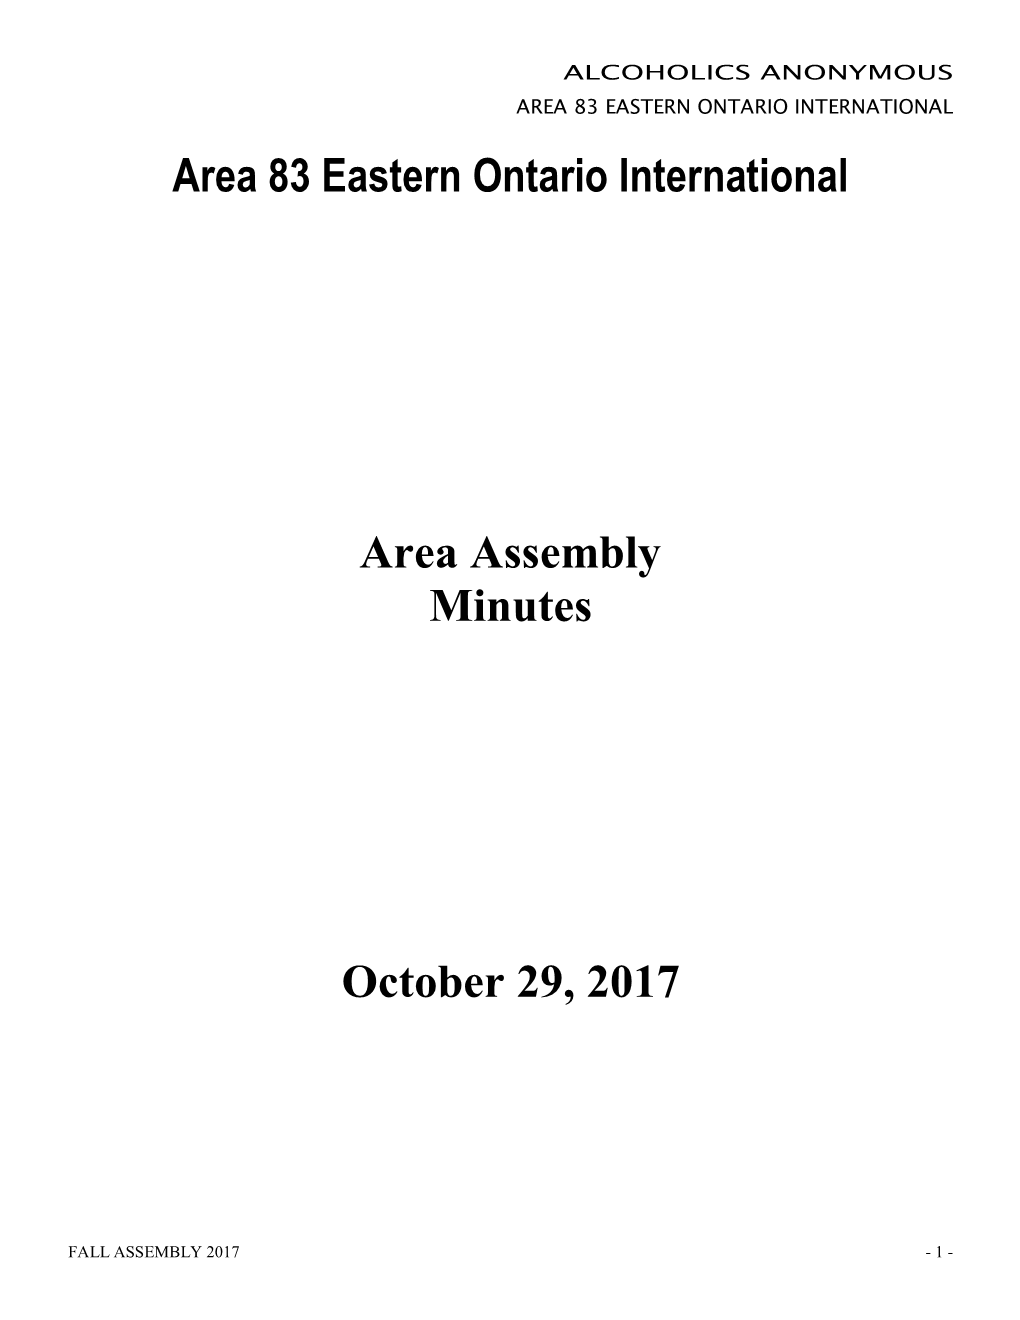 Area 83 Eastern Ontario International Area Assembly Minutes October 29